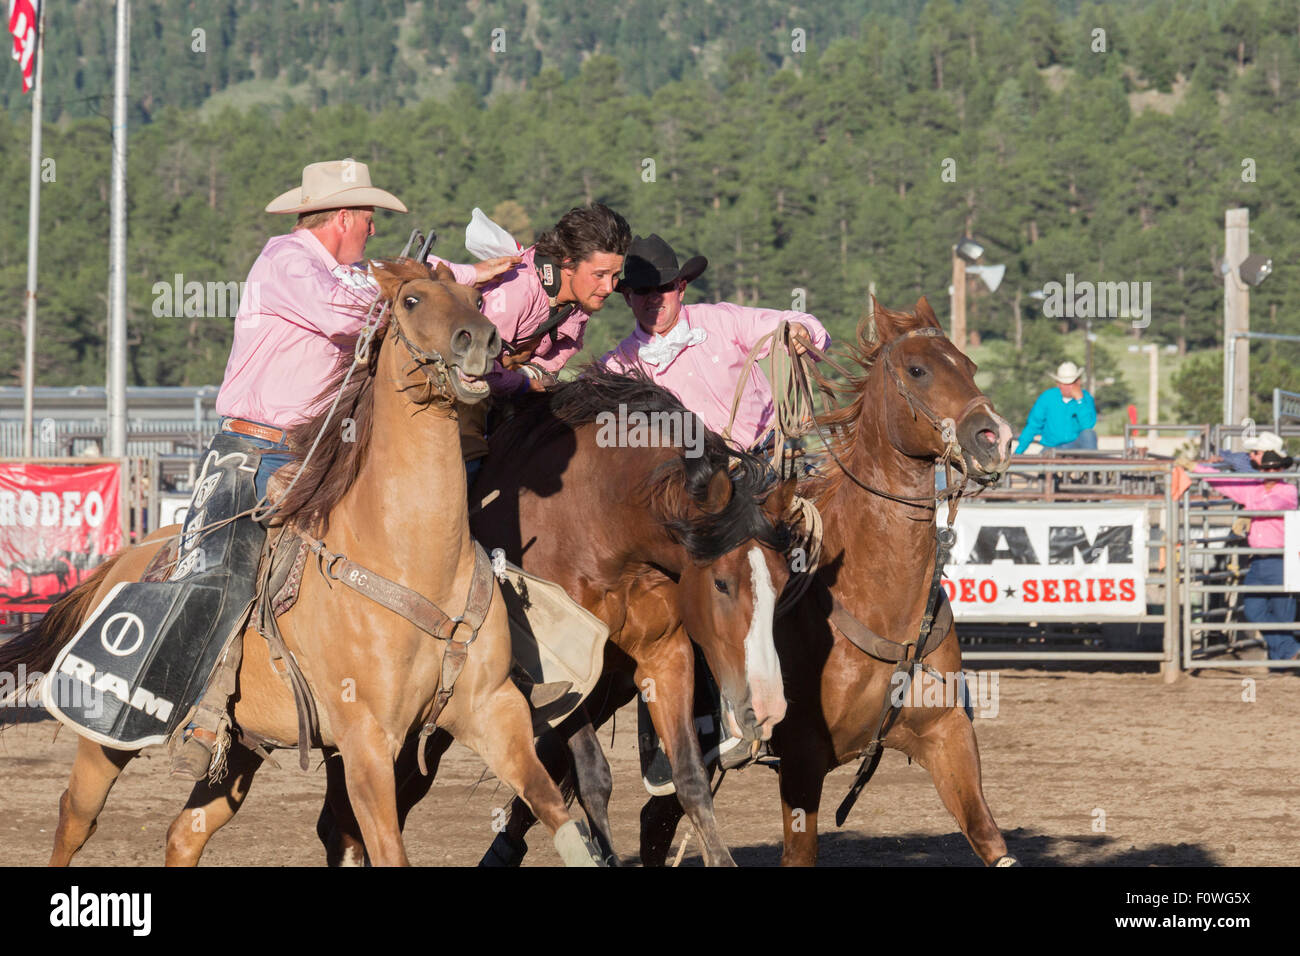 Estes Park, Colorado - Bareback riding competition at the Rooftop Rodeo. Pickup riders help a competitor (center) from his horse Stock Photo